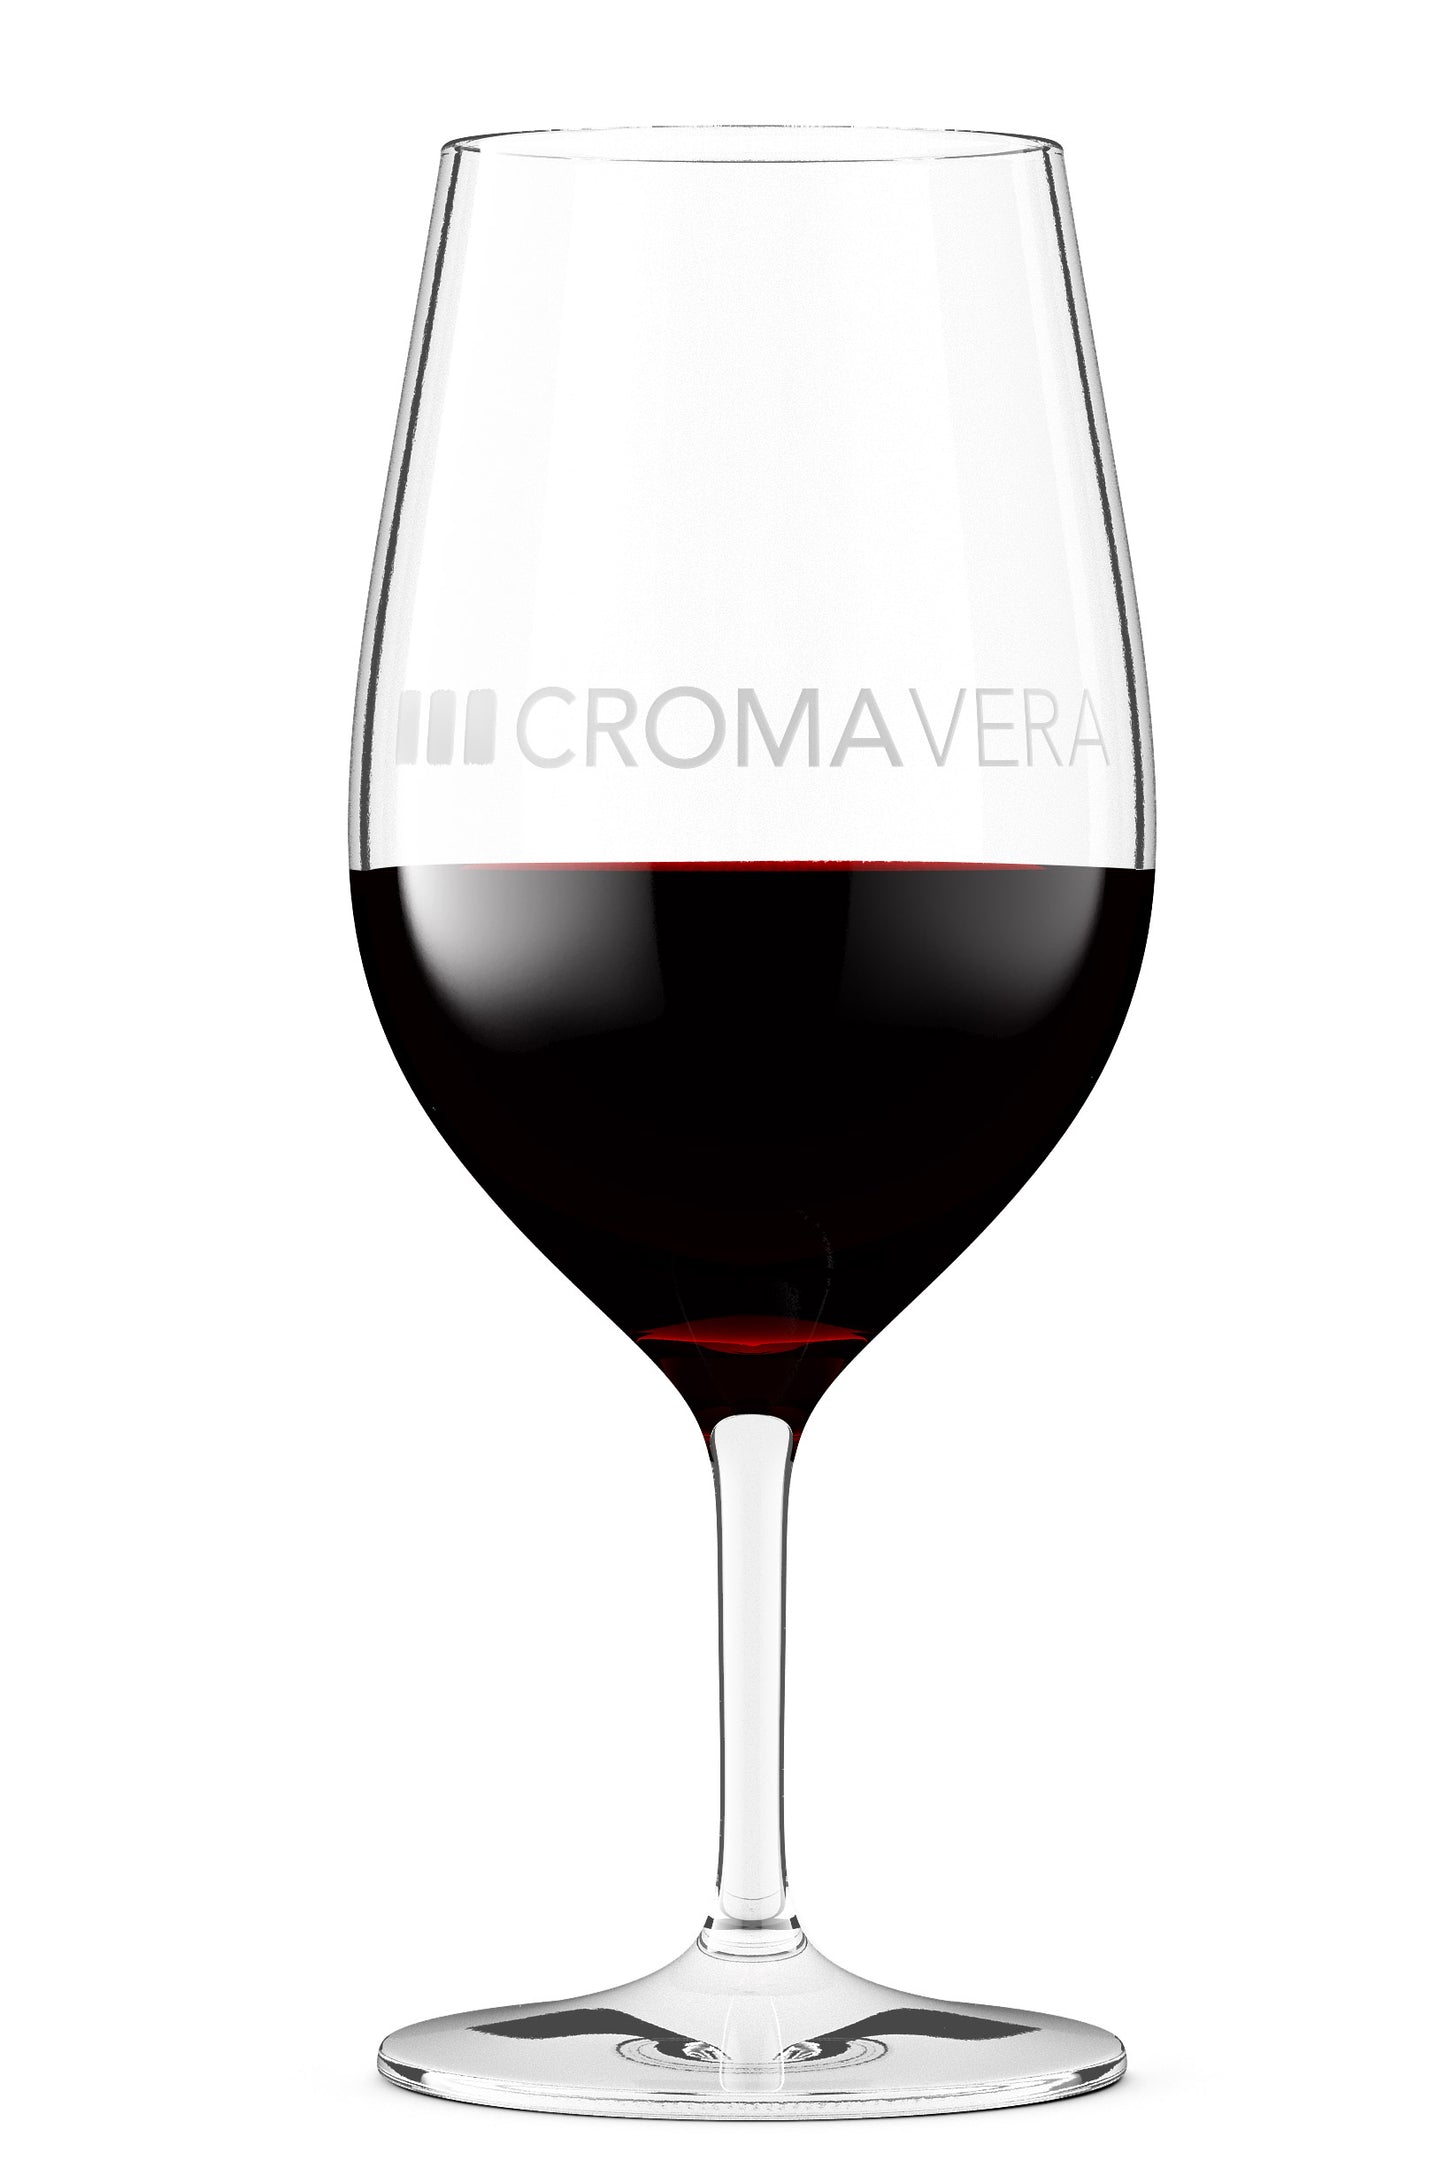 A wine glass filled with Revelación red wine